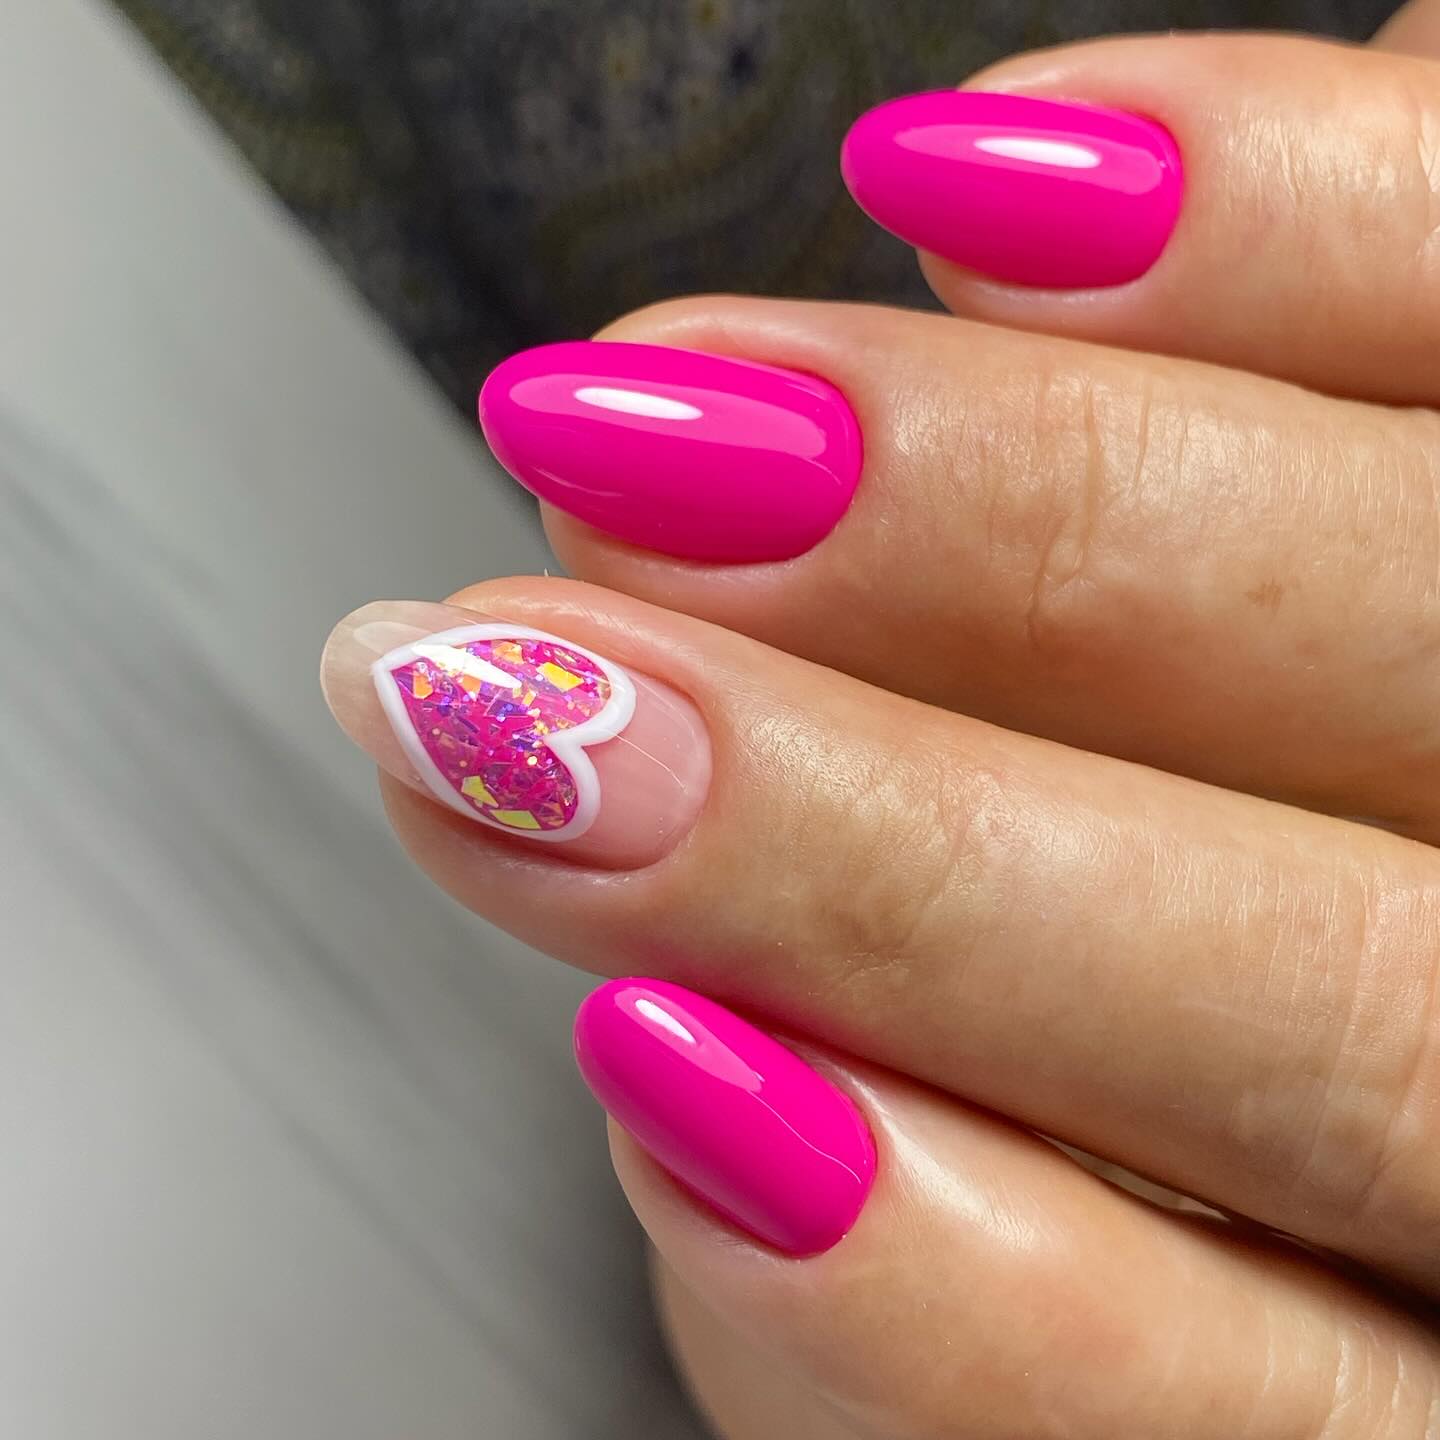 100 Pretty Spring Nail Designs To Try This Year images 102